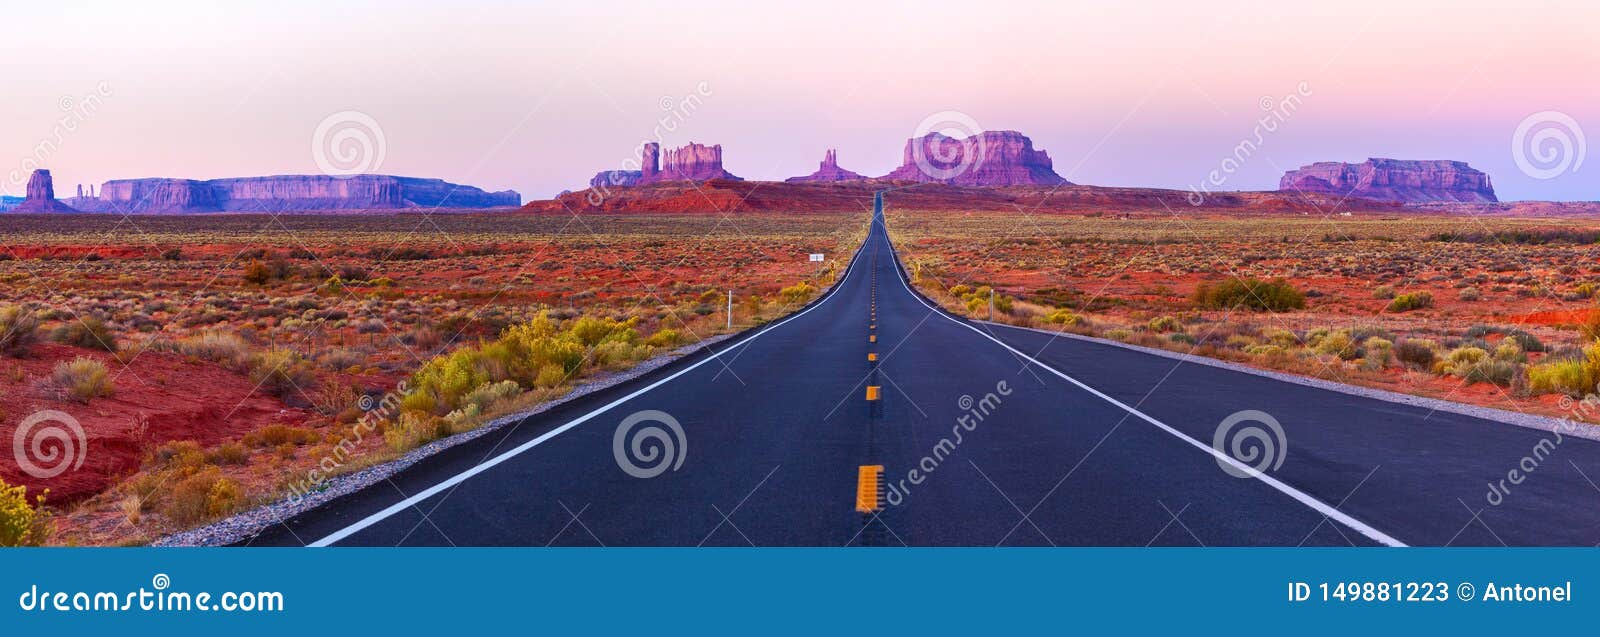 scenic view of monument valley in utah at twilight, usa